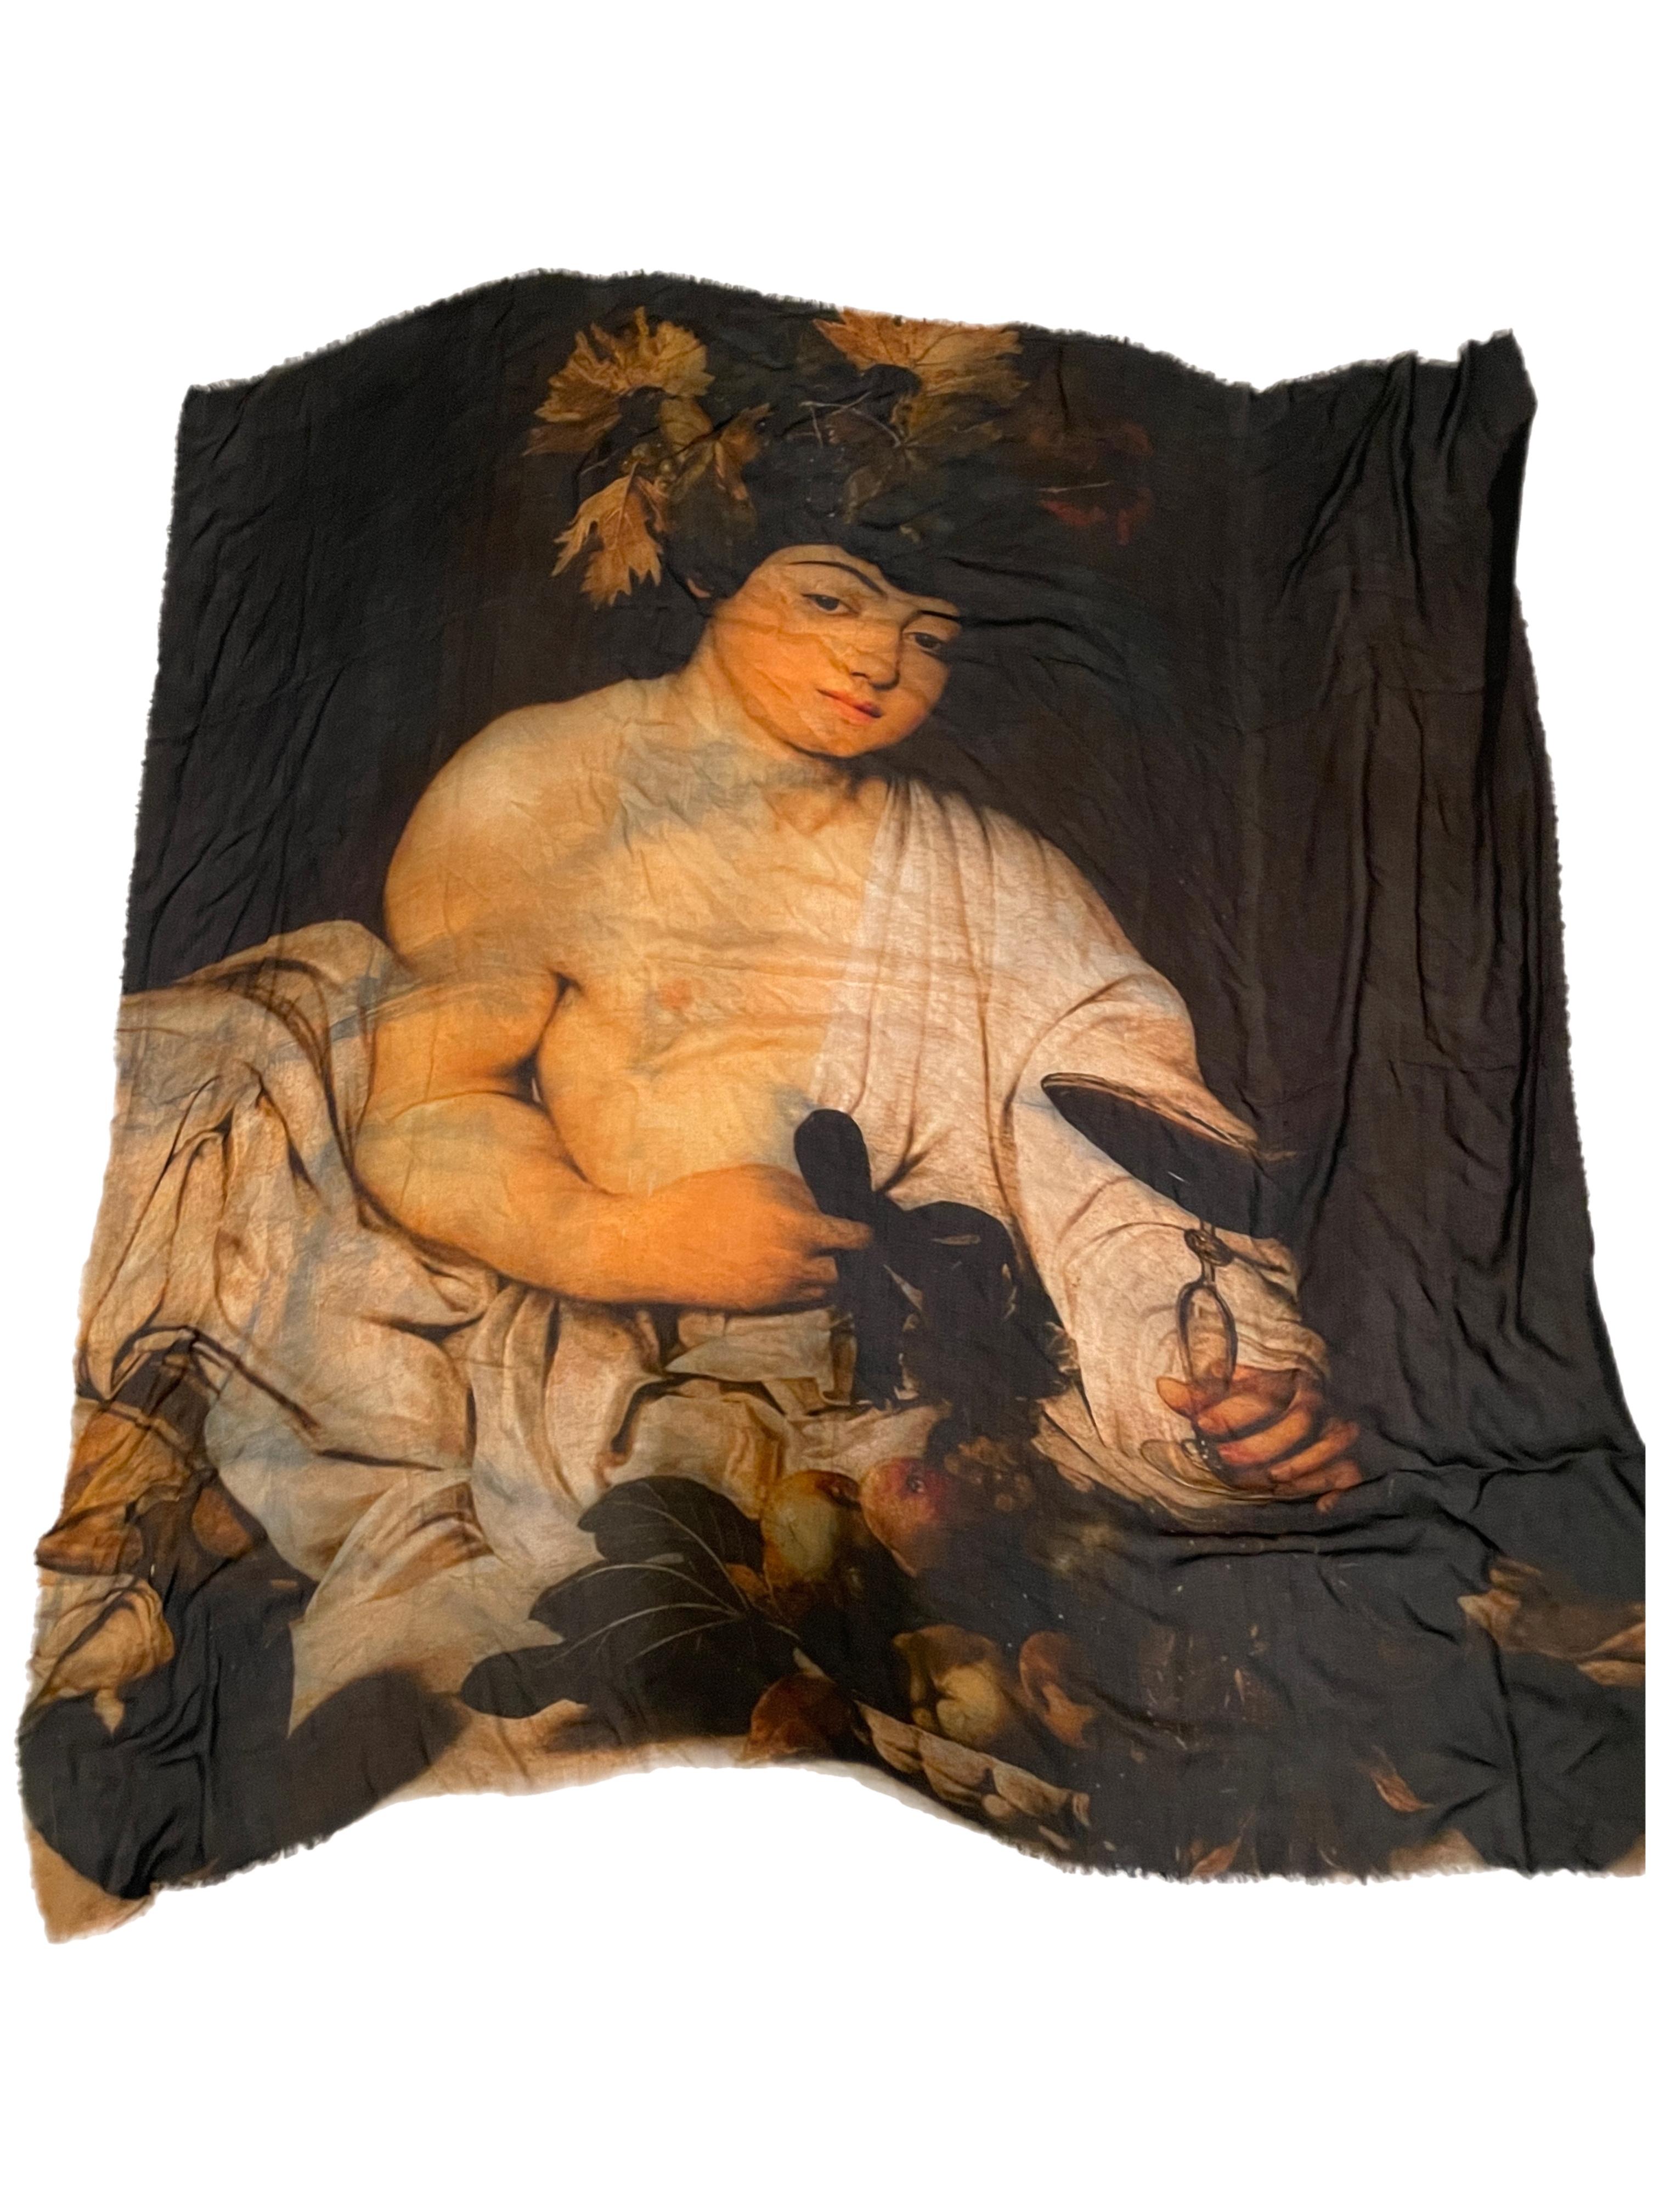 JEAN PAUL GAULTIER oversized stole / shawl / wrap / scarf / top / pareo / hair accessory / couch cover / whatever you desire it to be. Featuring Bacchus, the Greek god of overindulging in vino; this shawl measures roughly 56' x 56